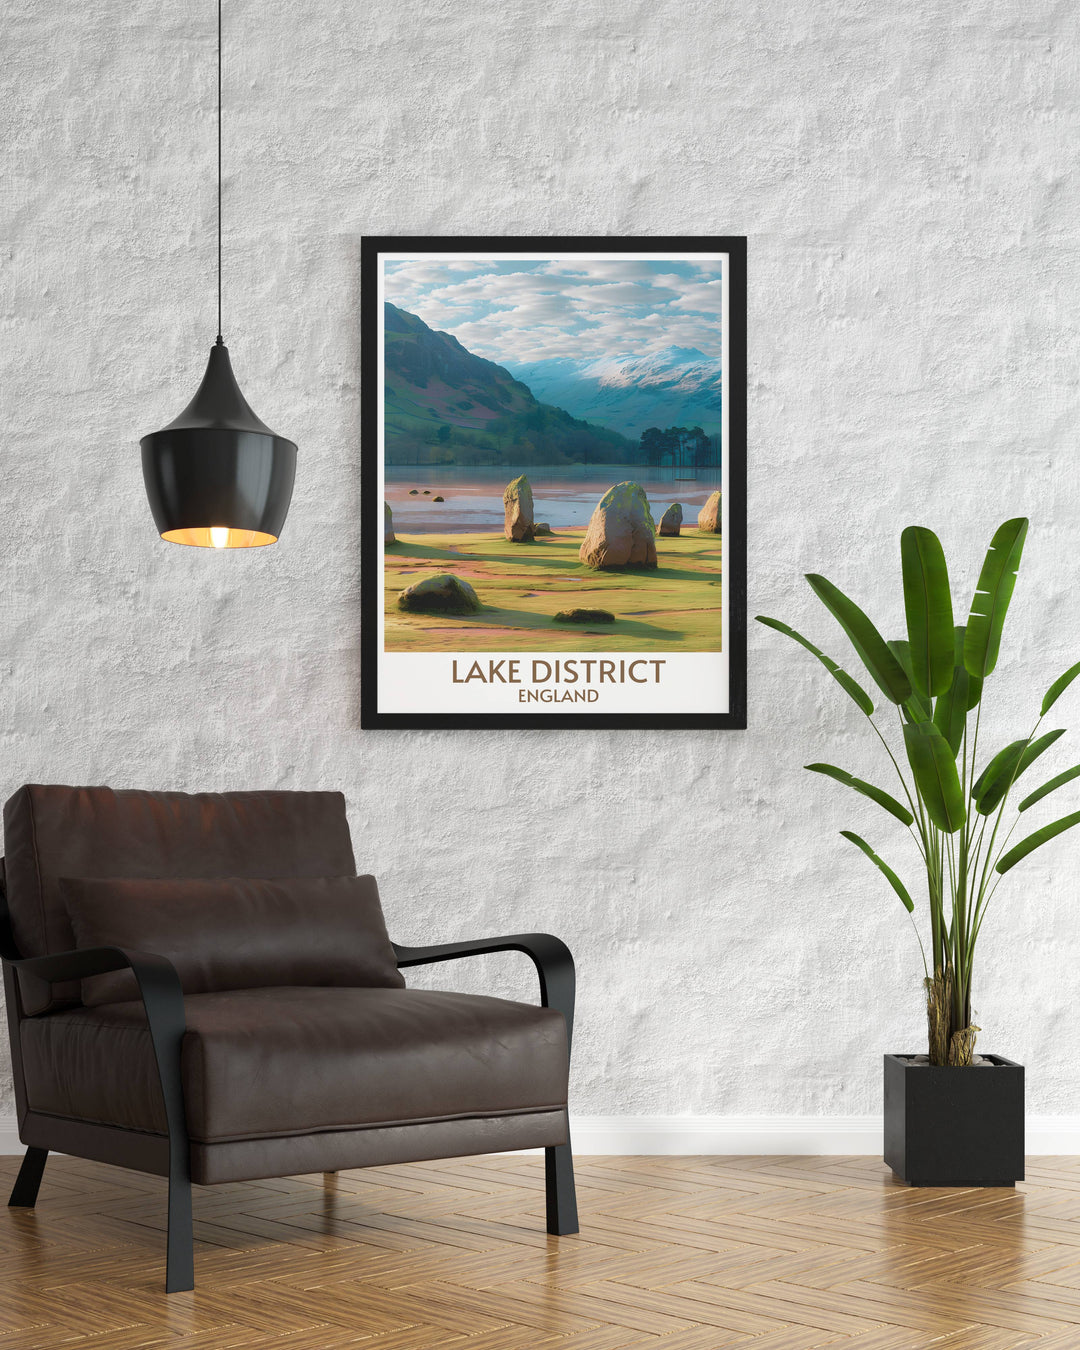 High quality Castlerigg Stone Circle artwork perfect for enhancing Lake District decor. This captivating print captures the essence of the Lake Districts rolling hills and ancient history, making it a thoughtful gift for travel and history lovers.